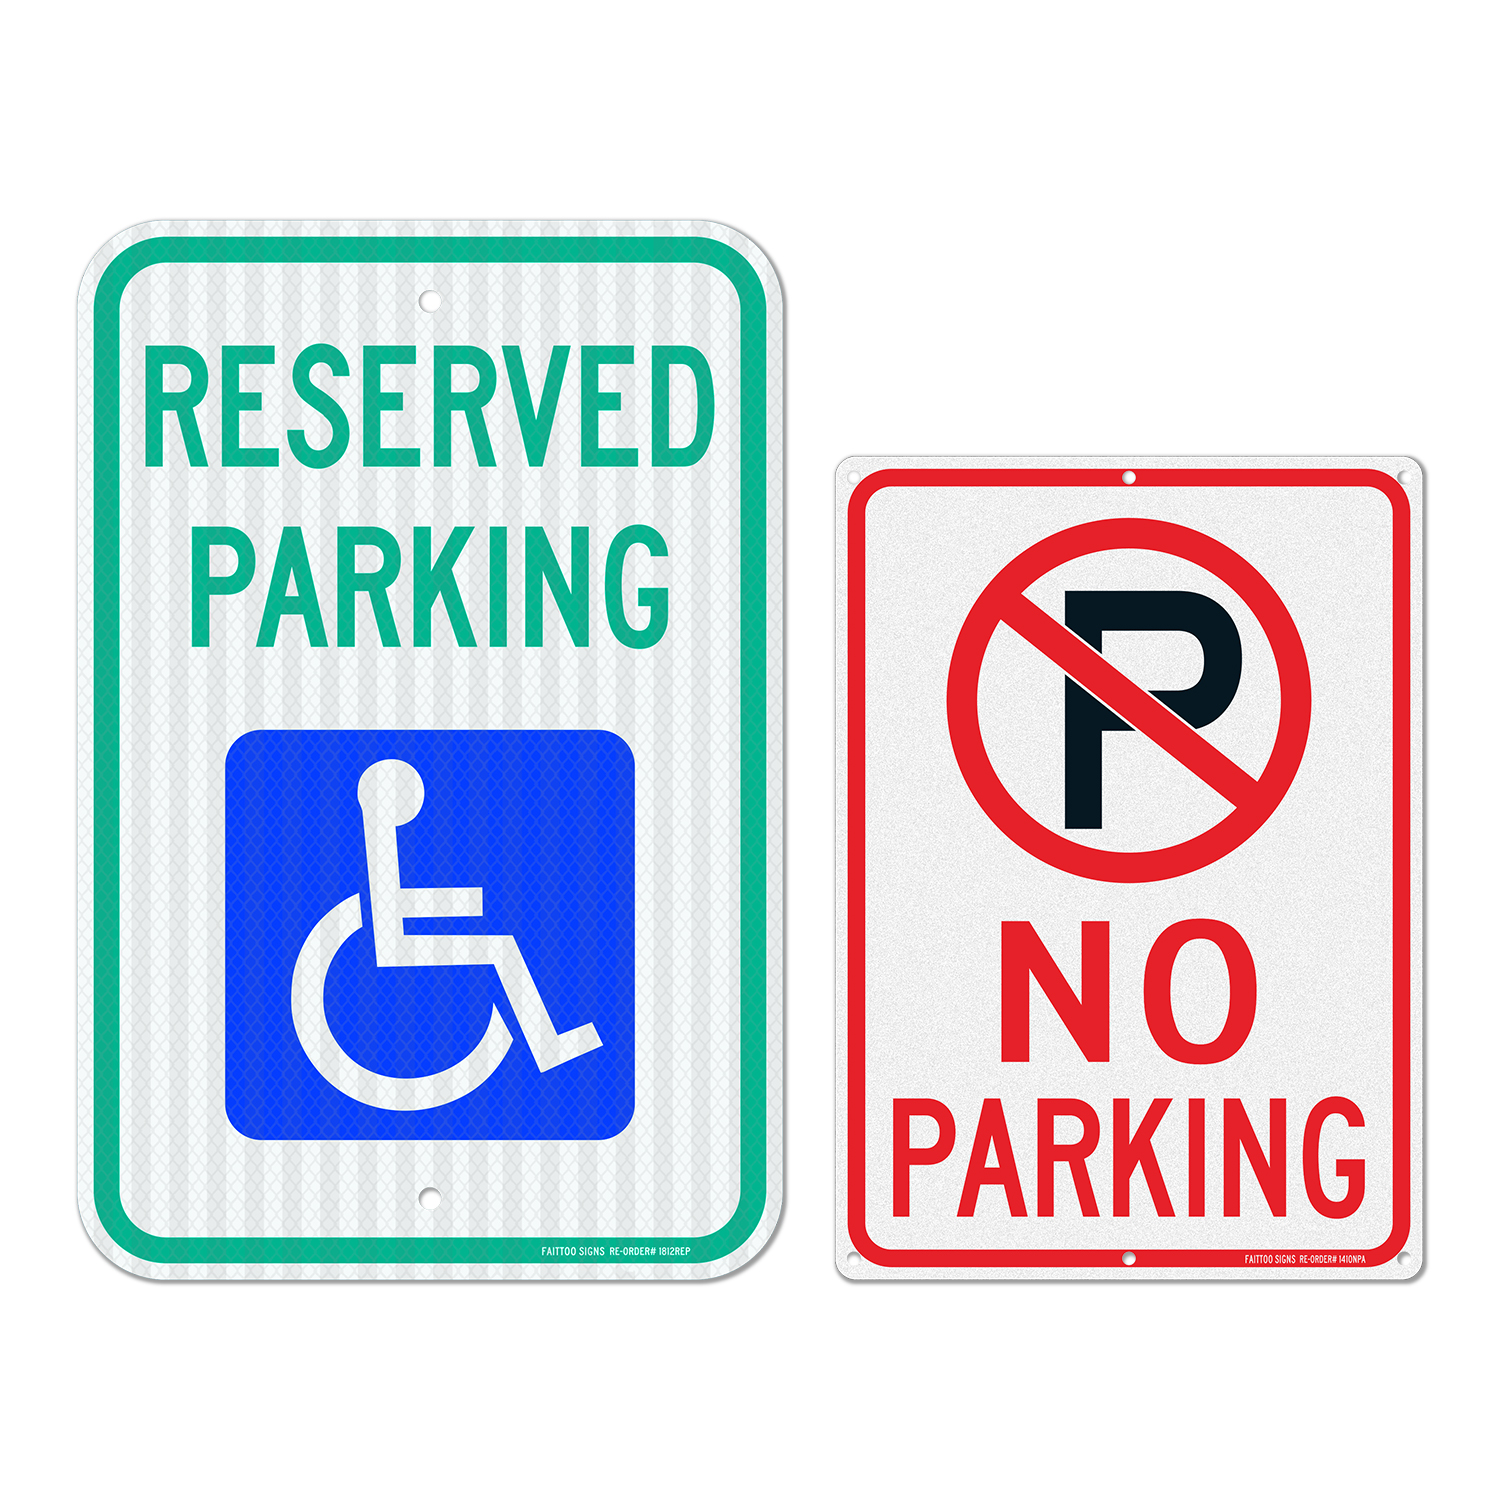 Faittoo 18" x 12" Reserved Parking Sign, Handicap Parking with Picture of Wheelchair Sign and 14" x 10" No Parking With Symbol Sign. Reflective Aluminum Traffic Sign, UV Protected, Fade Resistant, Easy to Install